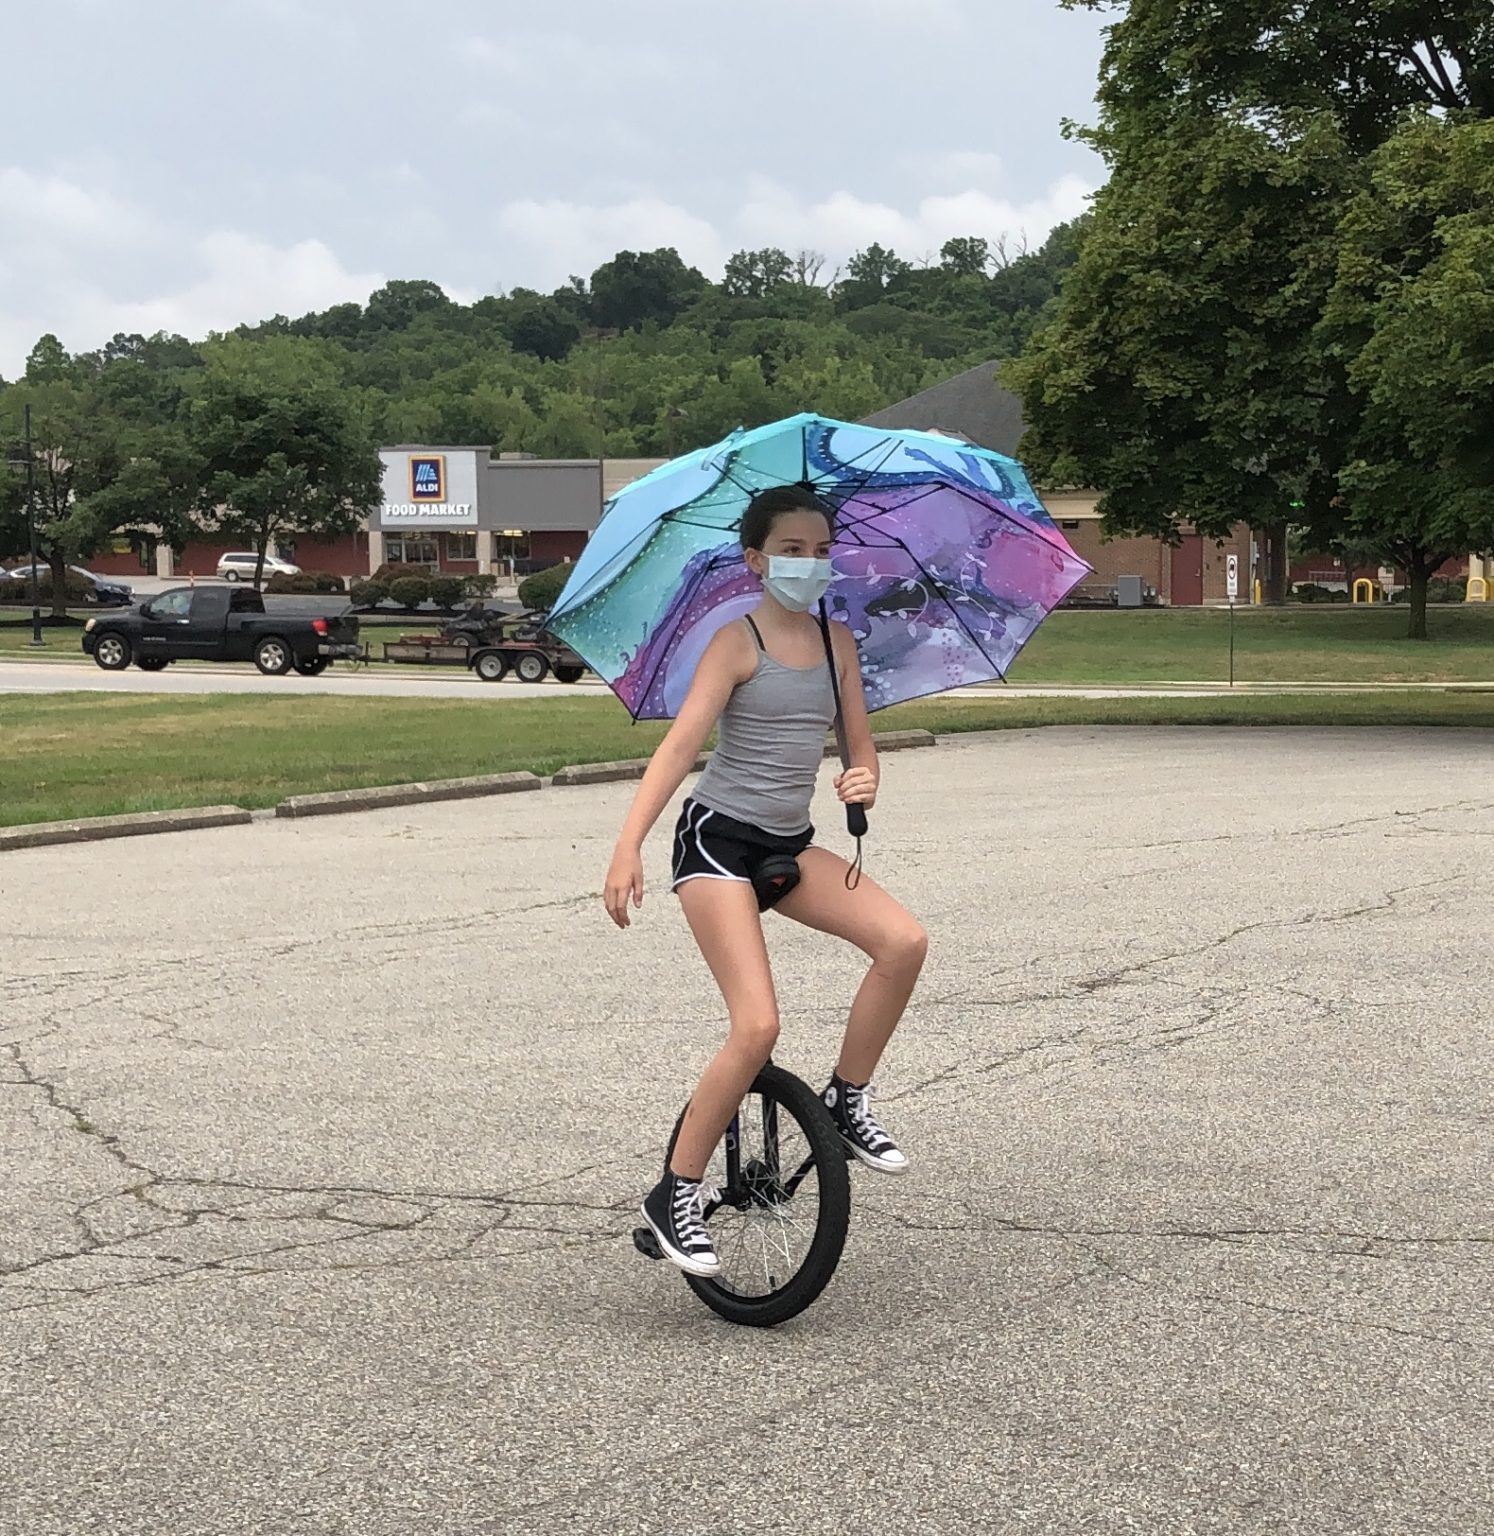 my nose turns red youth circus performer unicycling with an umbrella while wearing a mask